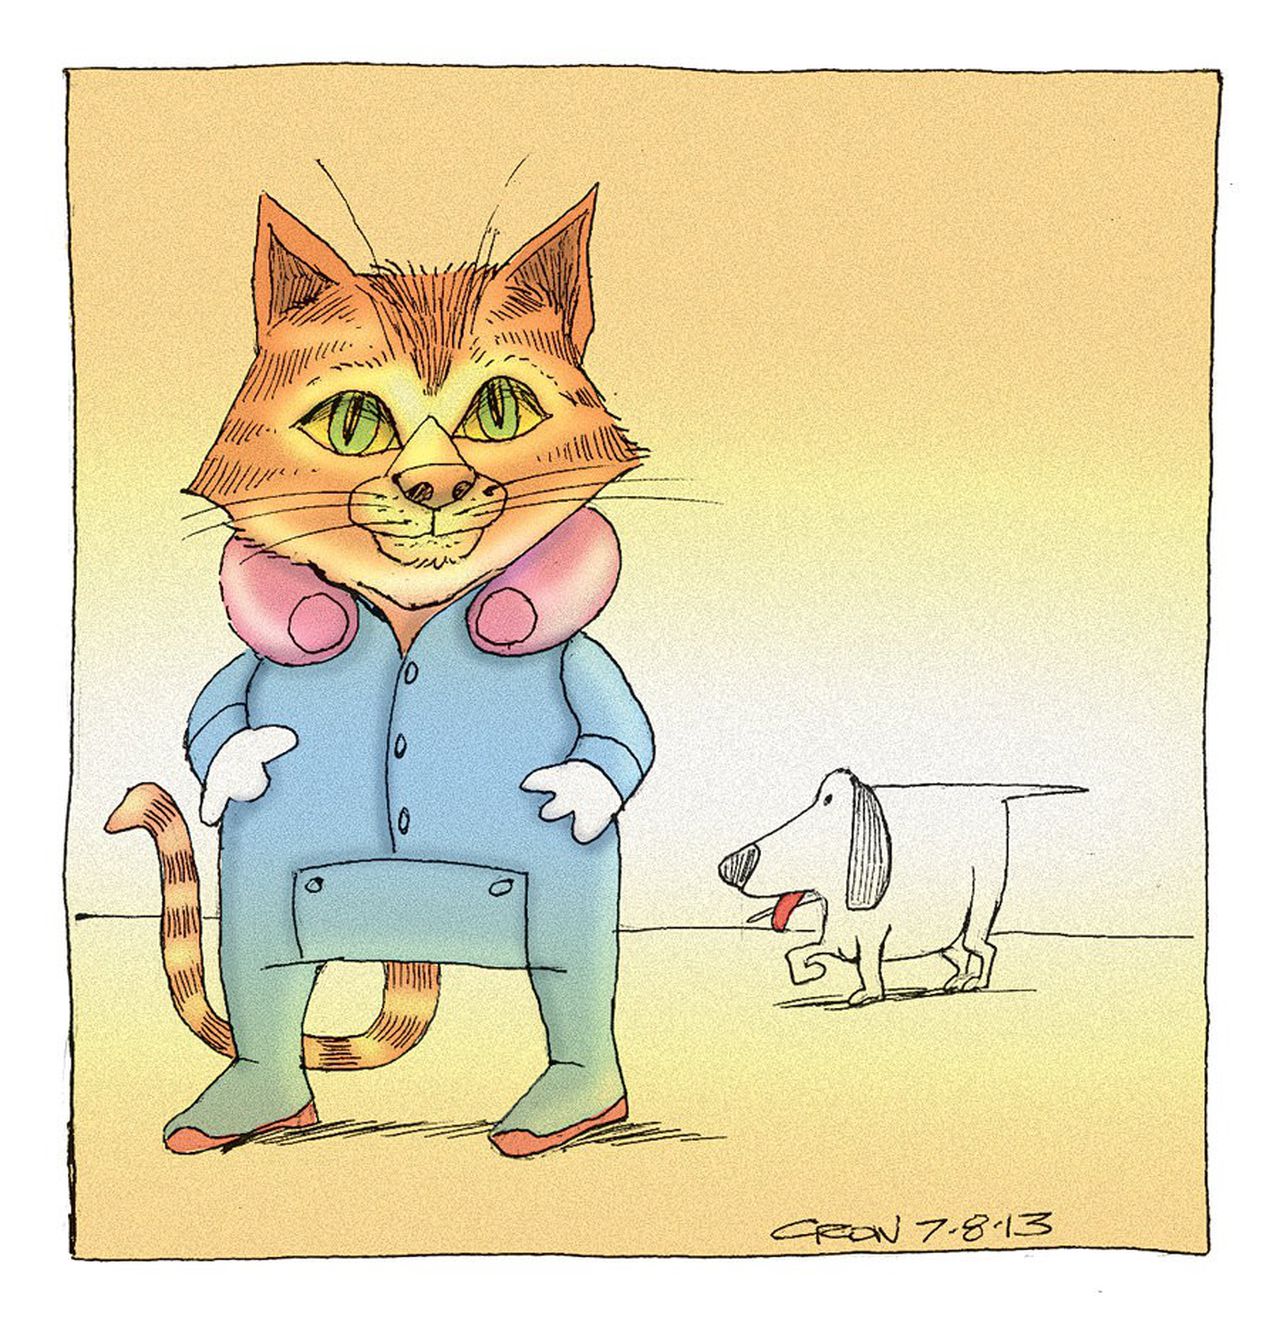 A cat makes its way into our weekly cartooncaption